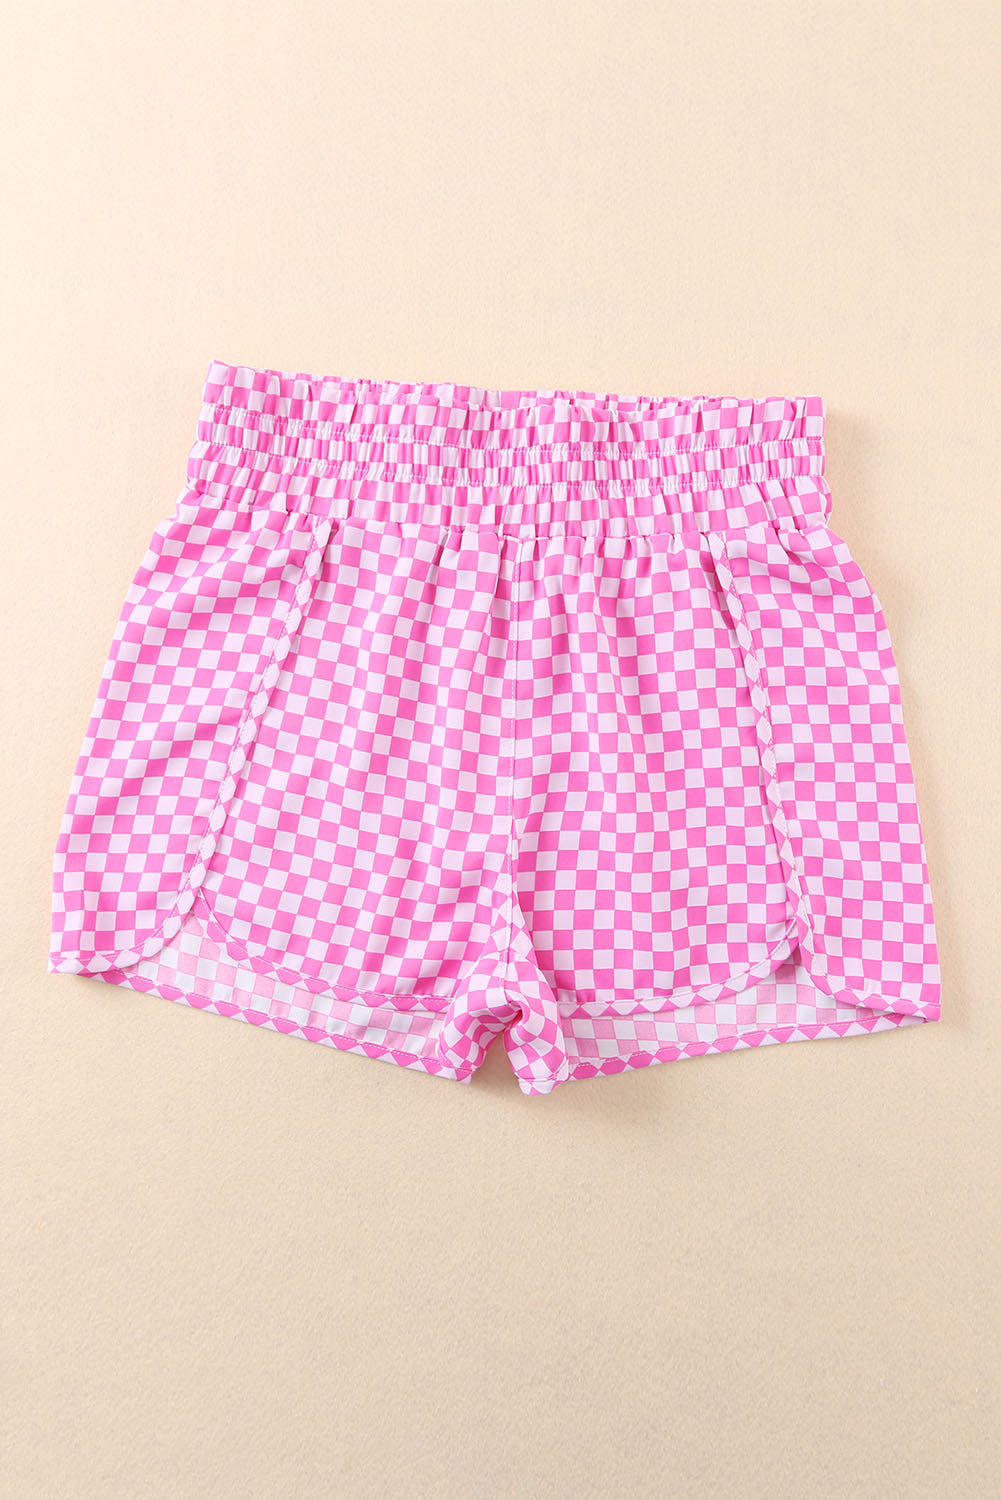 Leopard Elastic Waist Shorts - Checkered / S - Women’s Clothing & Accessories - Shorts - 27 - 2024